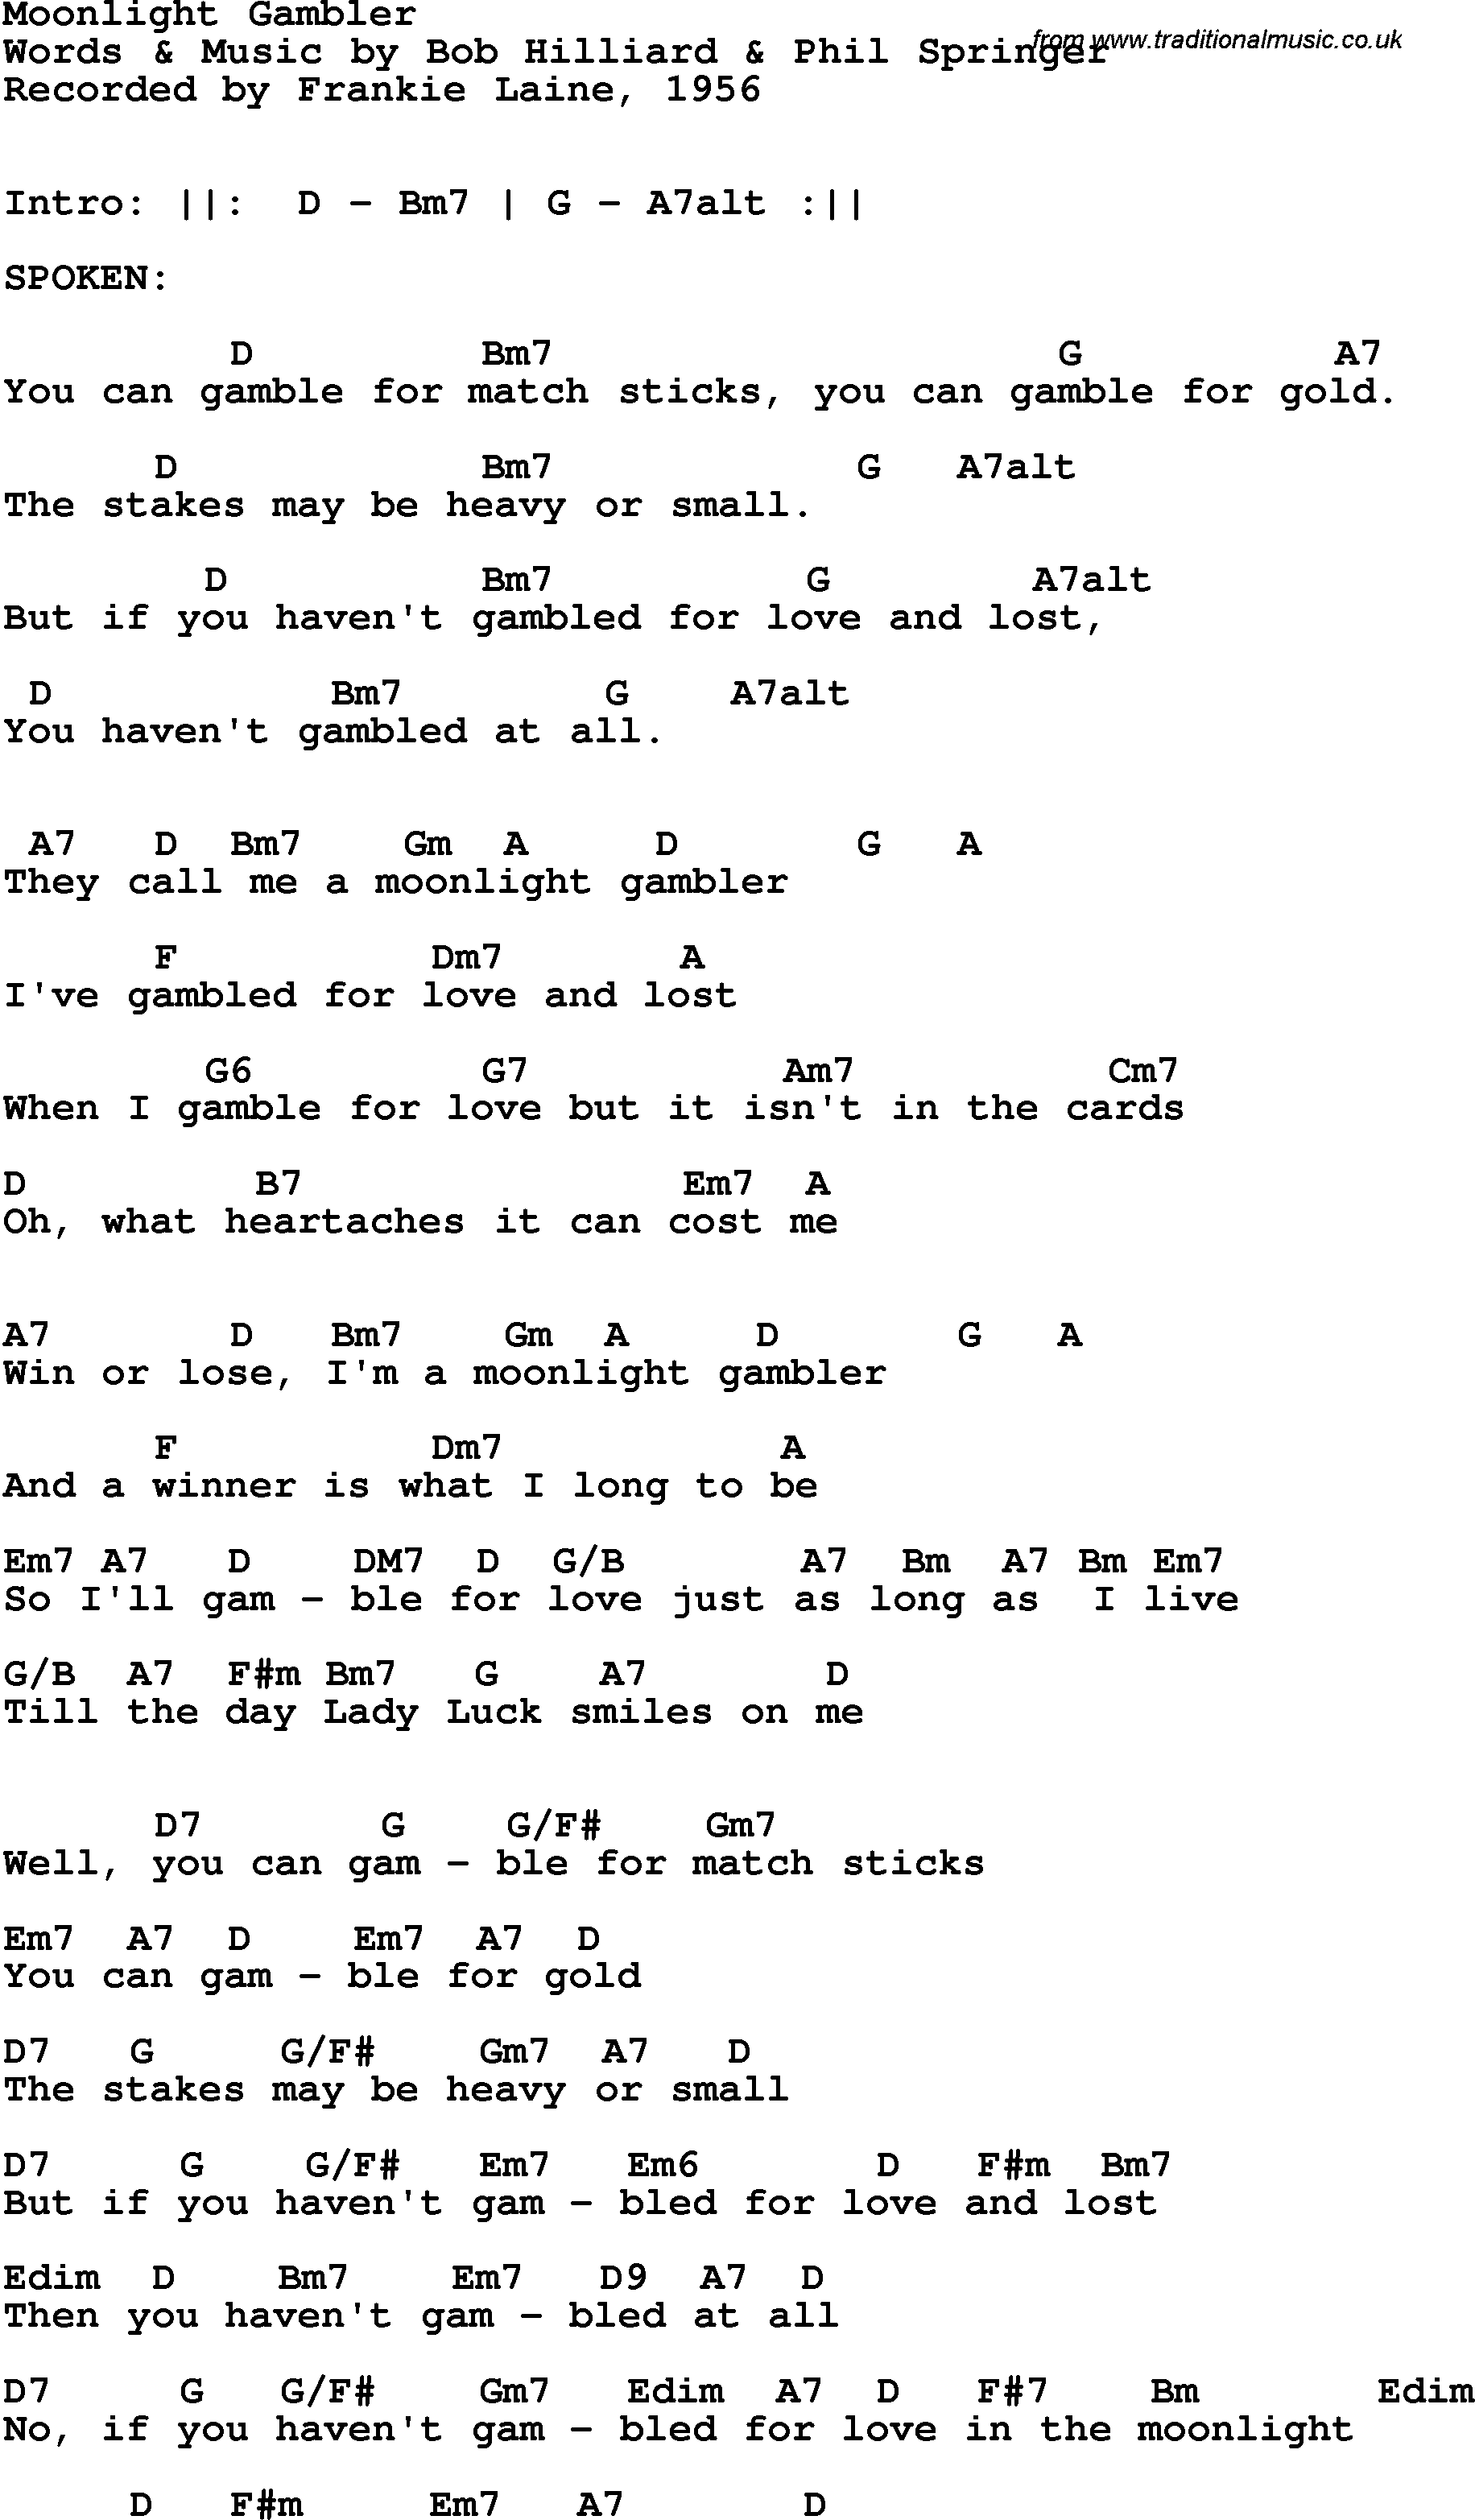 Song Lyrics with guitar chords for Moonlight Gambler - Frankie Laine, 1956